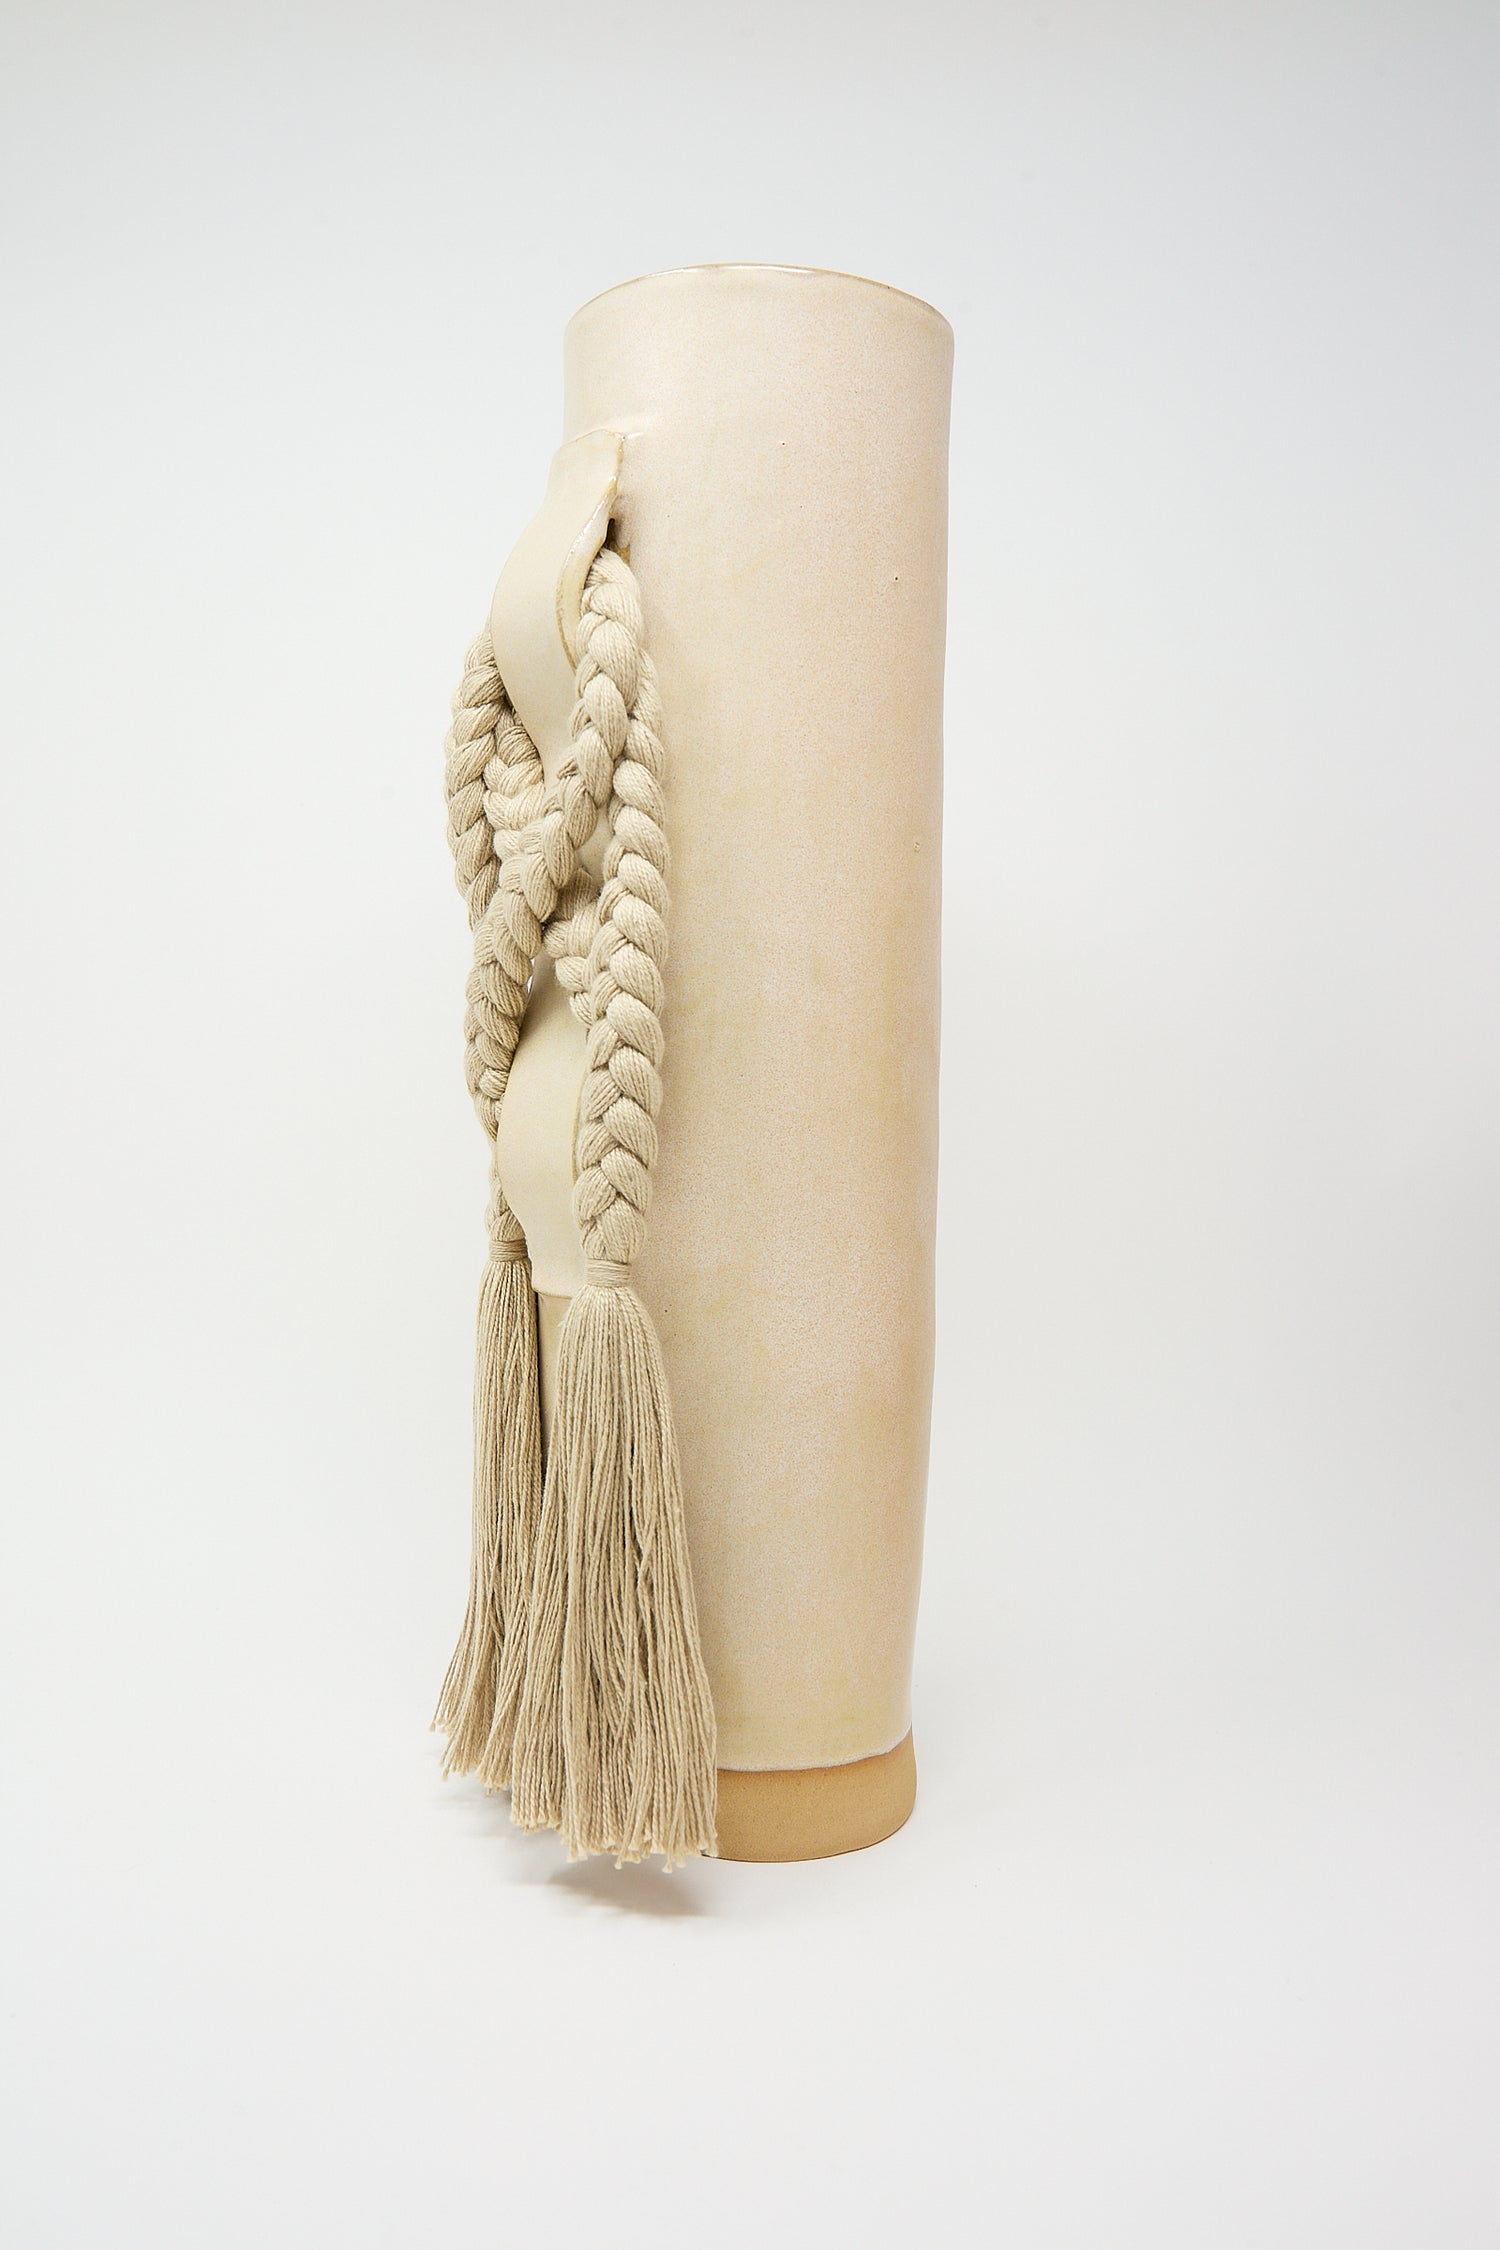 Beige cylindrical handcrafted Vase #696 bolster pillow with braided tassels on a white background by Karen Tinney.